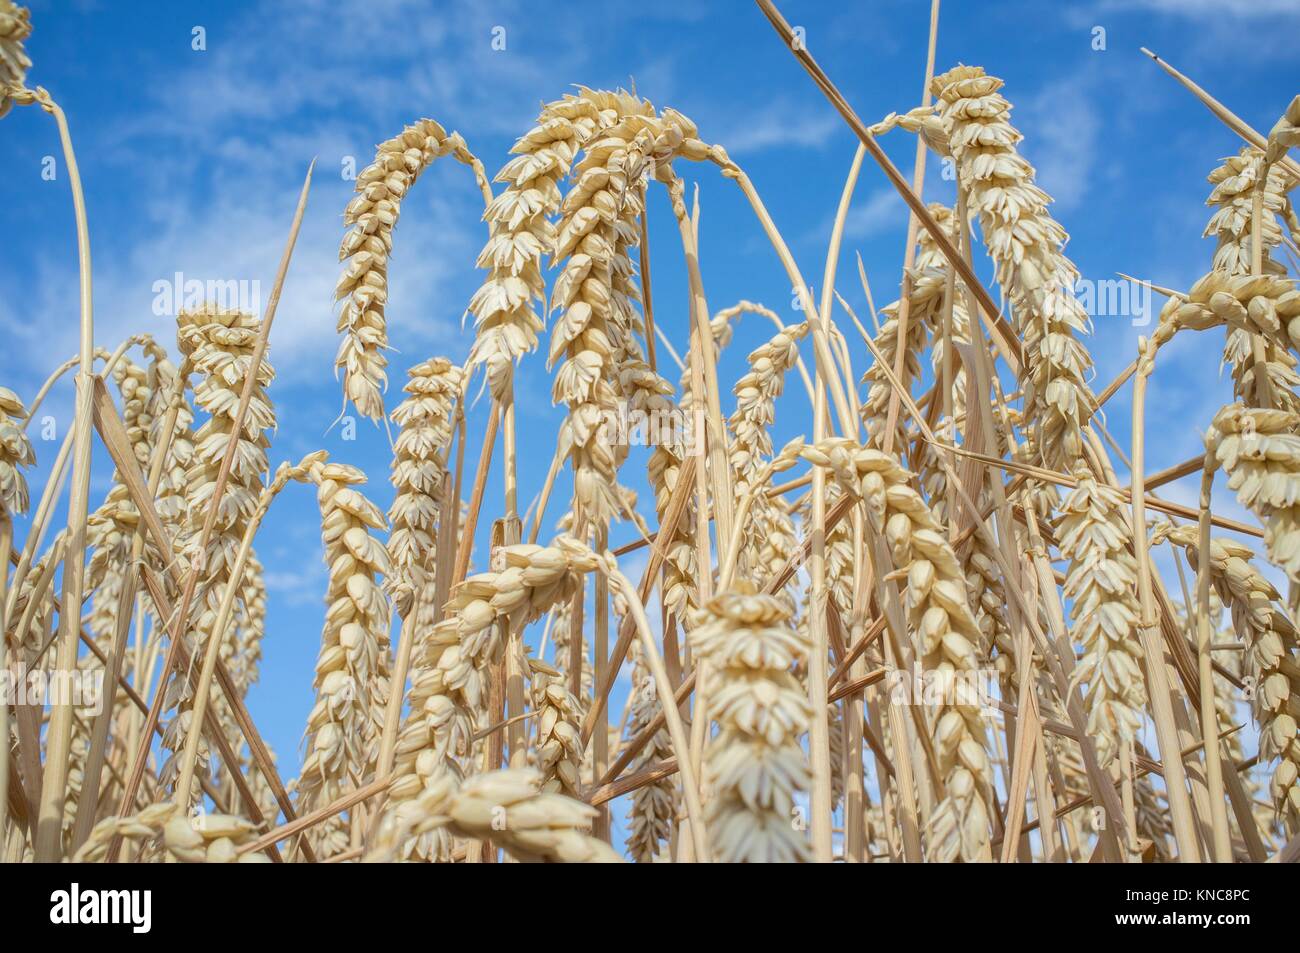 Wheat ears full of grains at cereal field over blue sky. Low angle view. Stock Photo